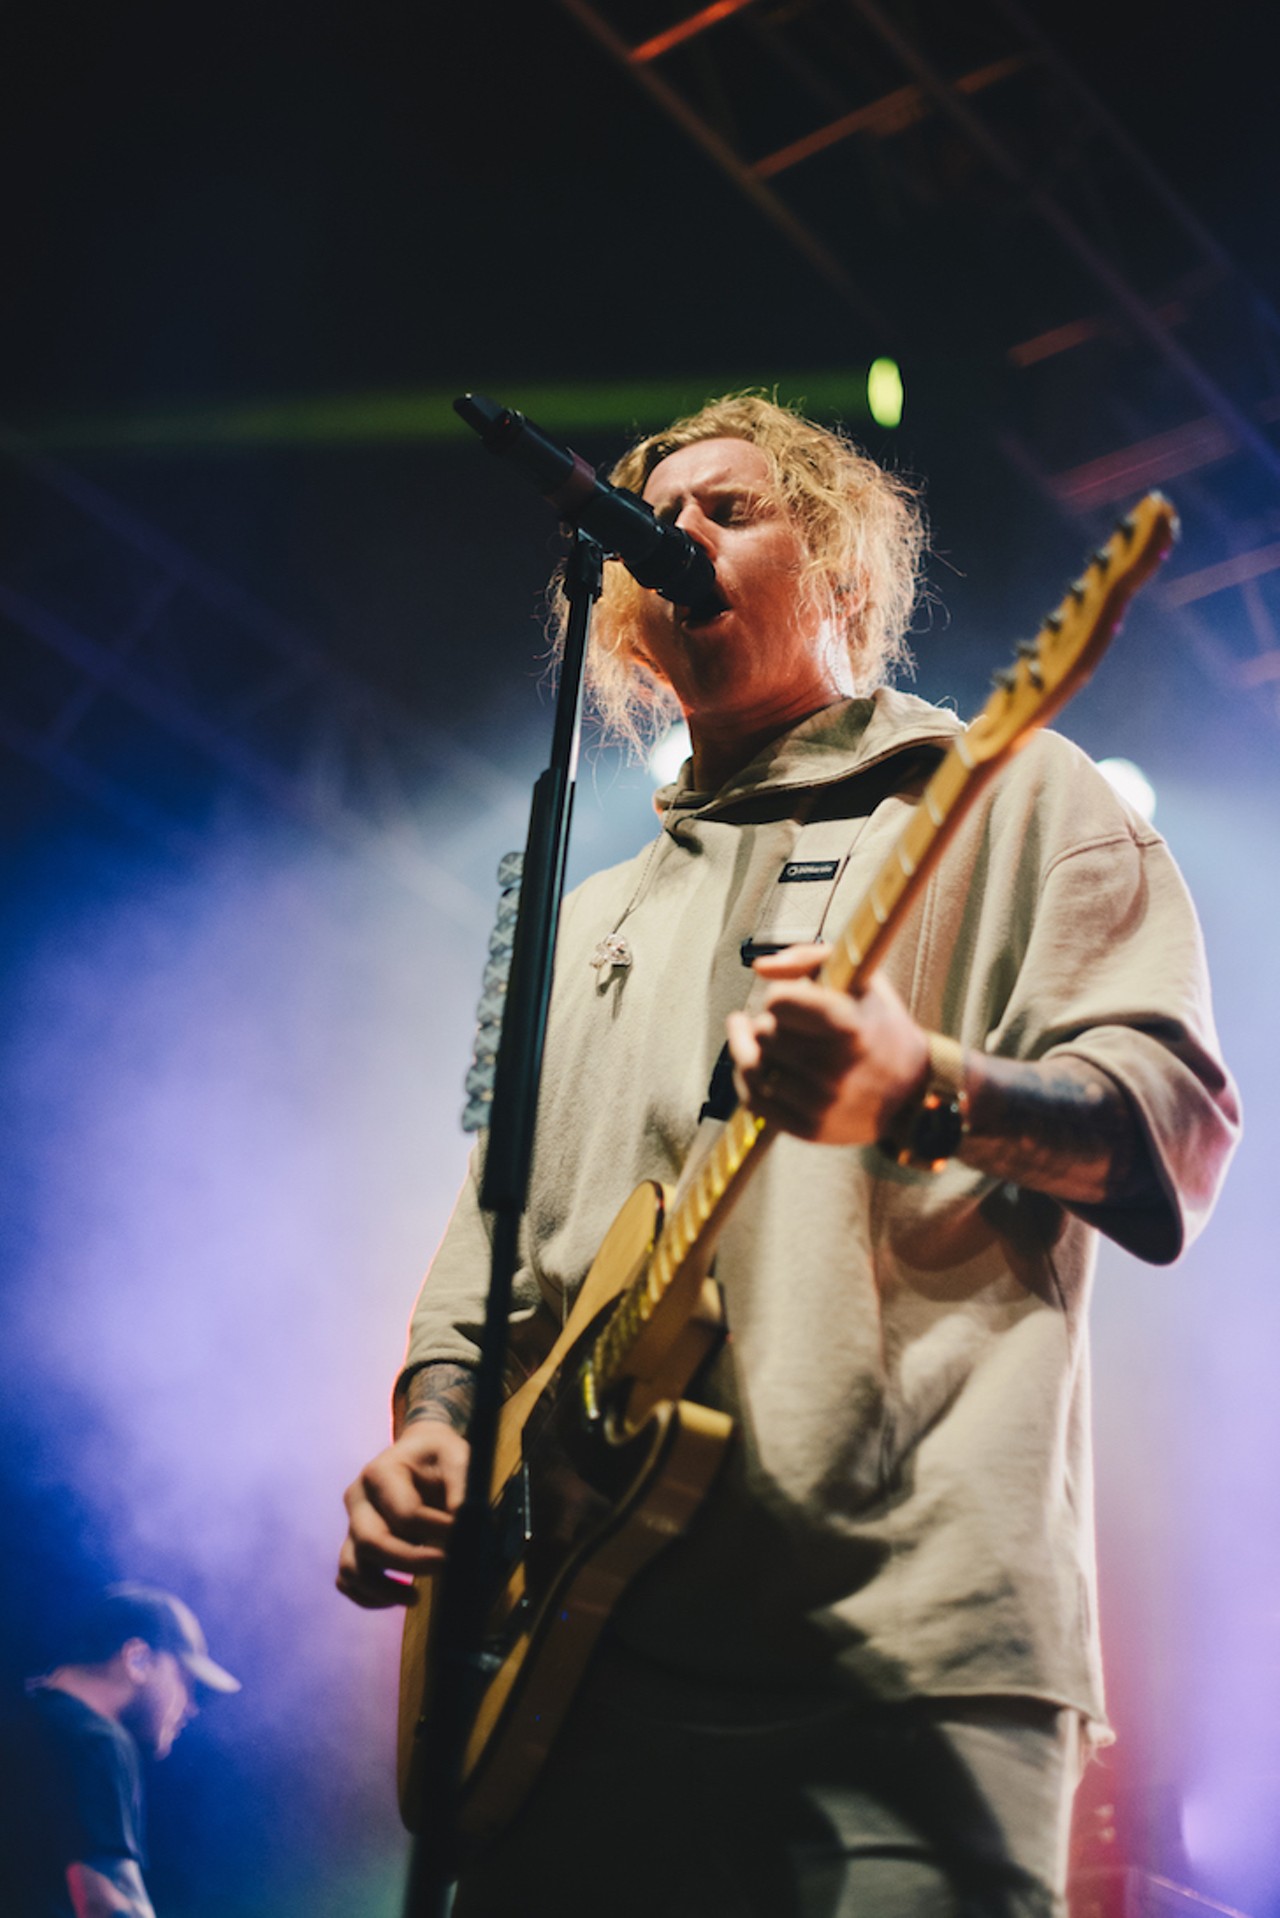 Photos from Cute Is What We Aim For, We The Kings and Plaid Brixx at the Beacham